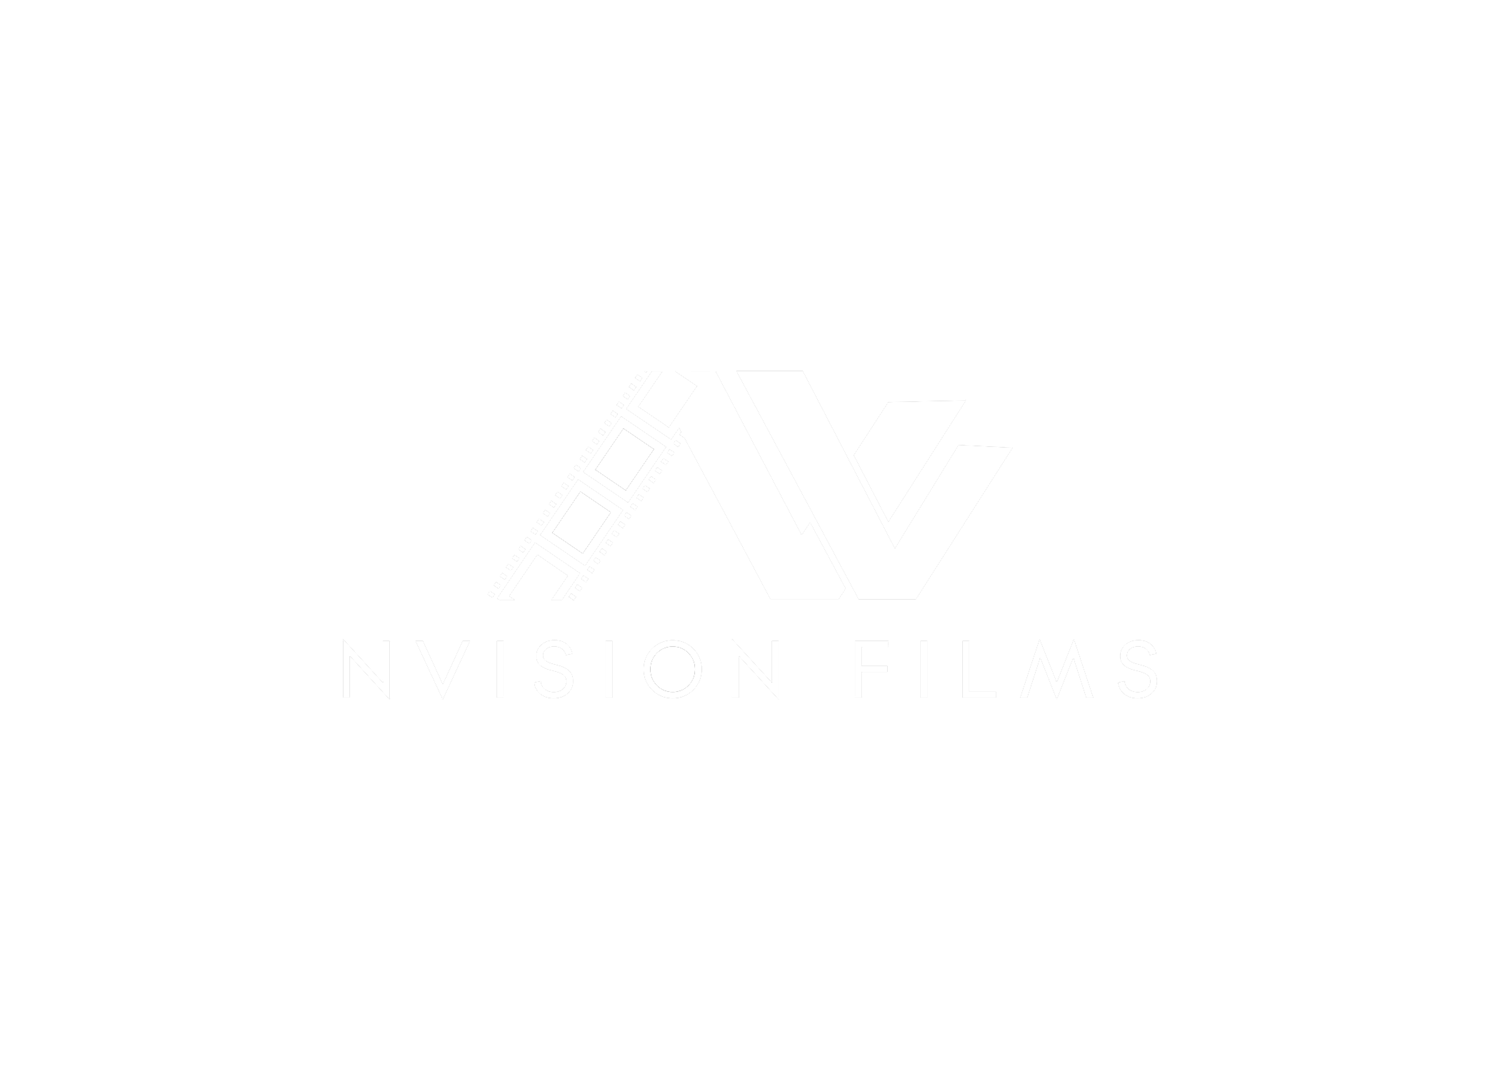 NVision Films